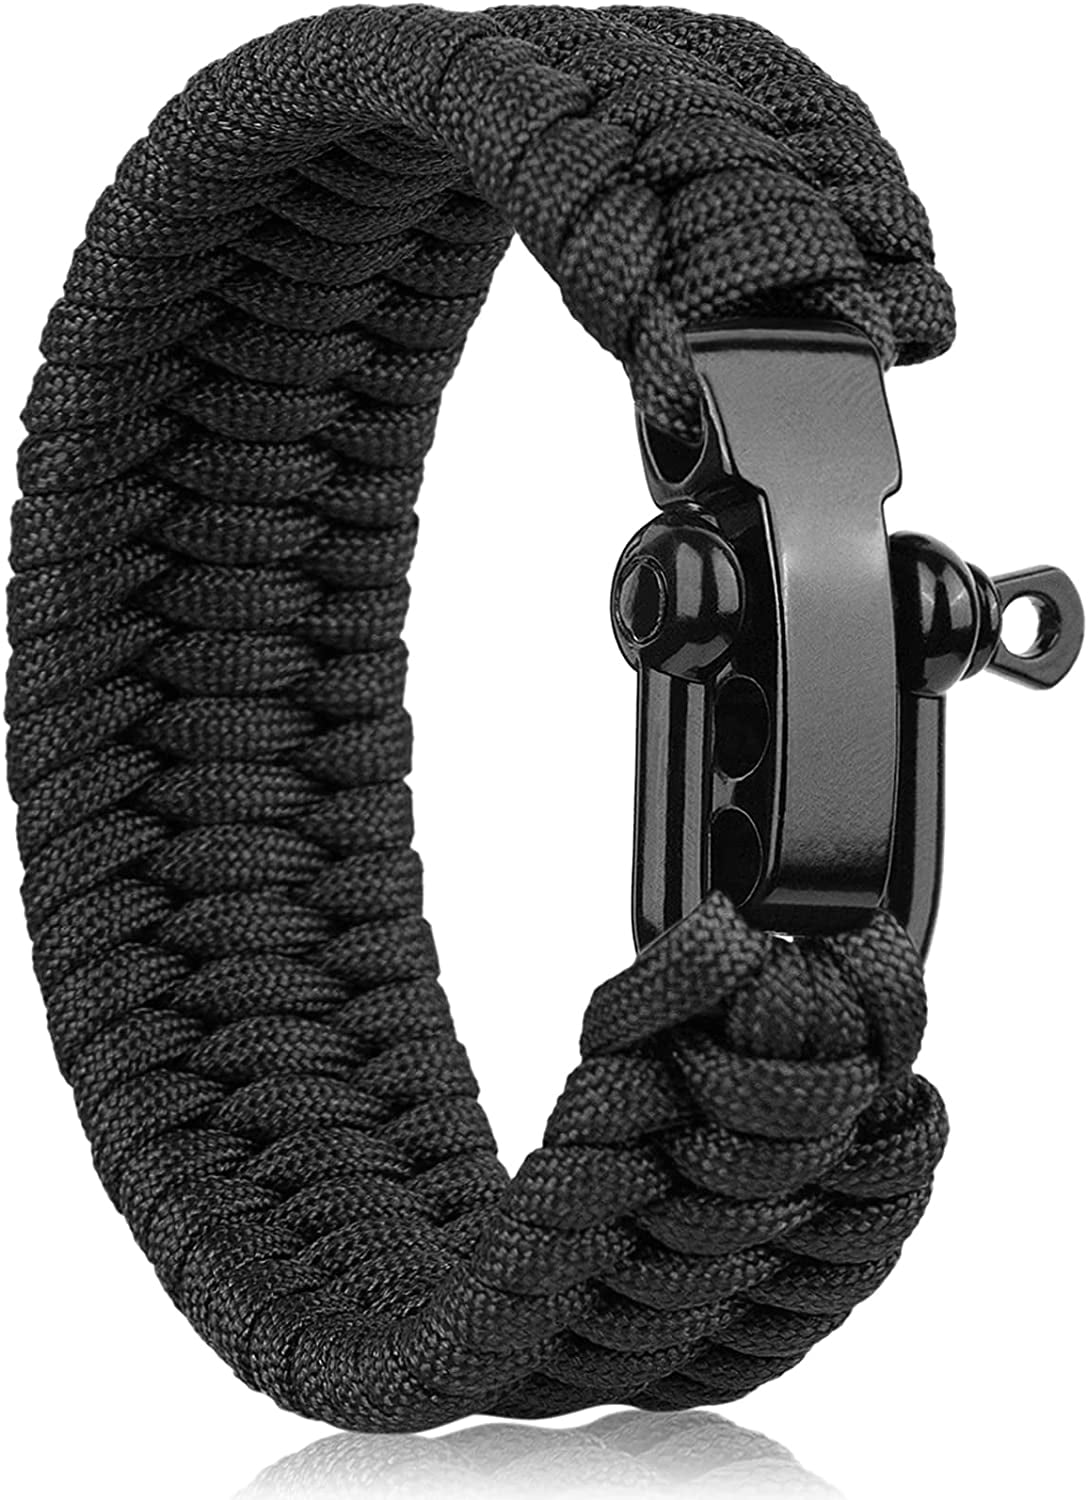 Fish Tail Paracord Survival Bracelets with Metal Clasp, Adjustable Size Fits